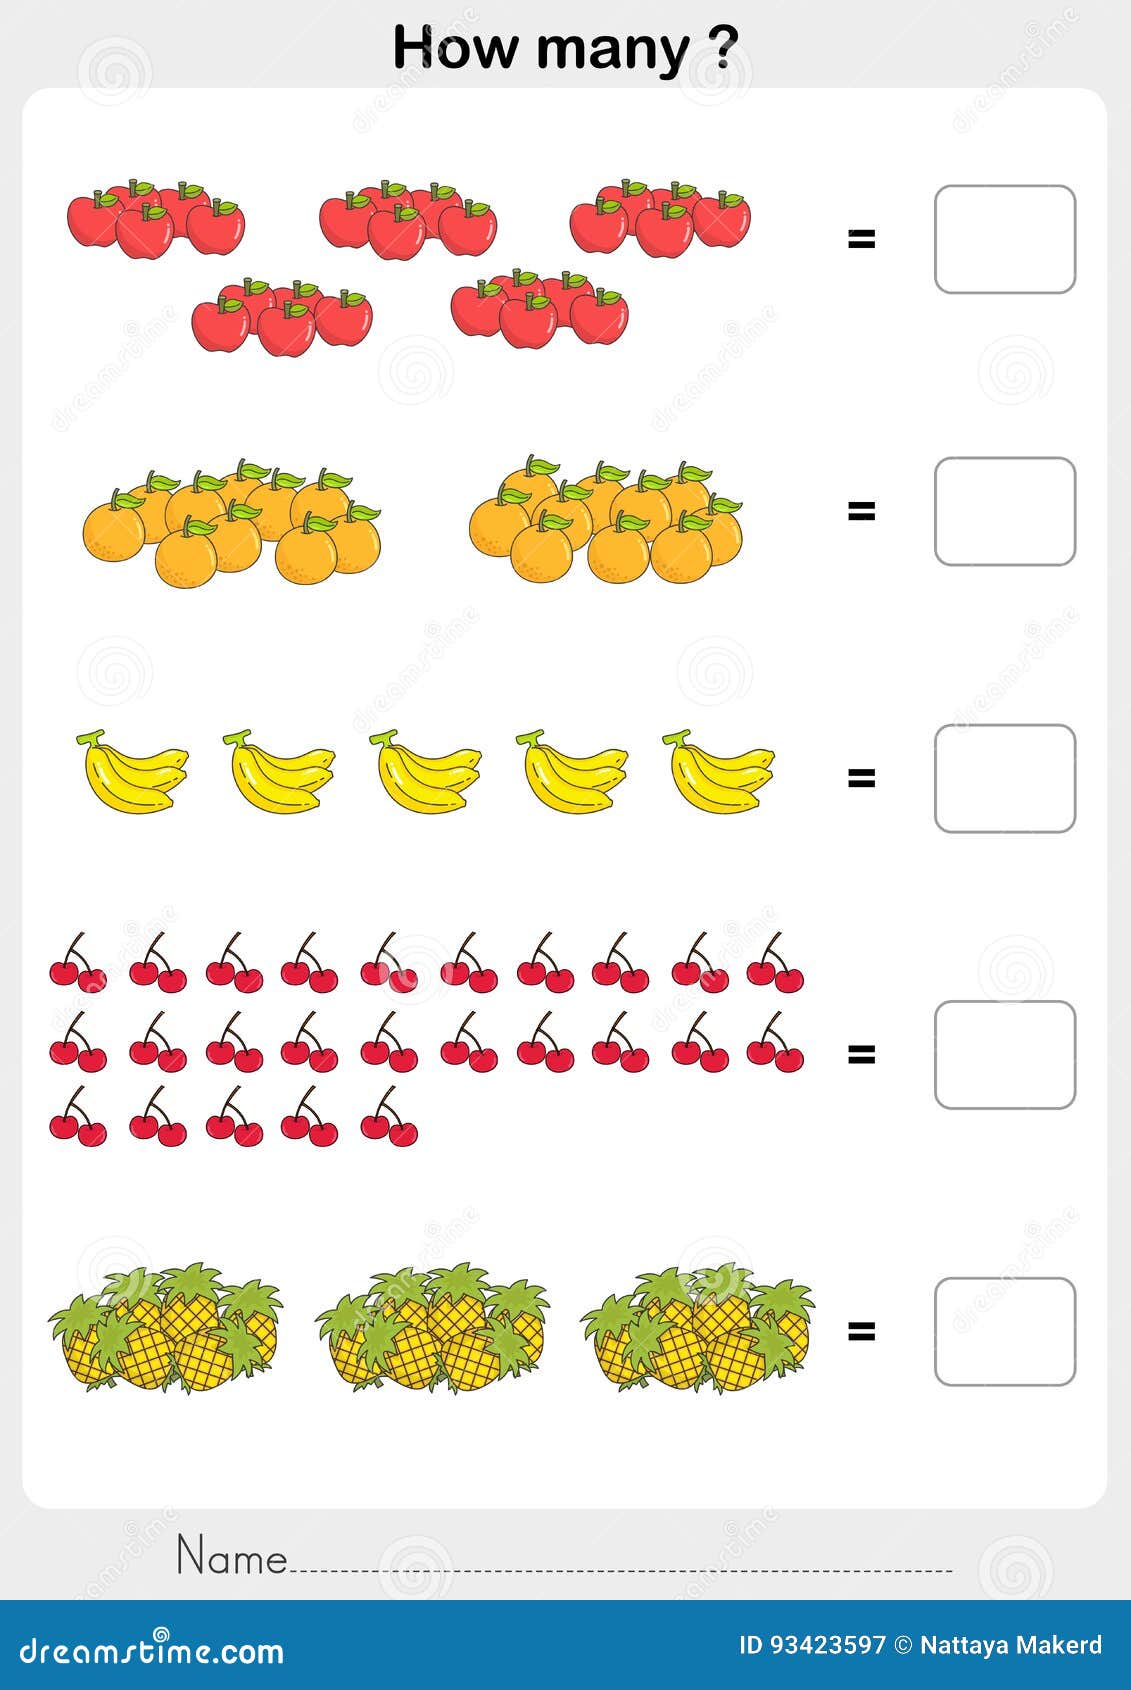 count the fruits. then write the solutions.